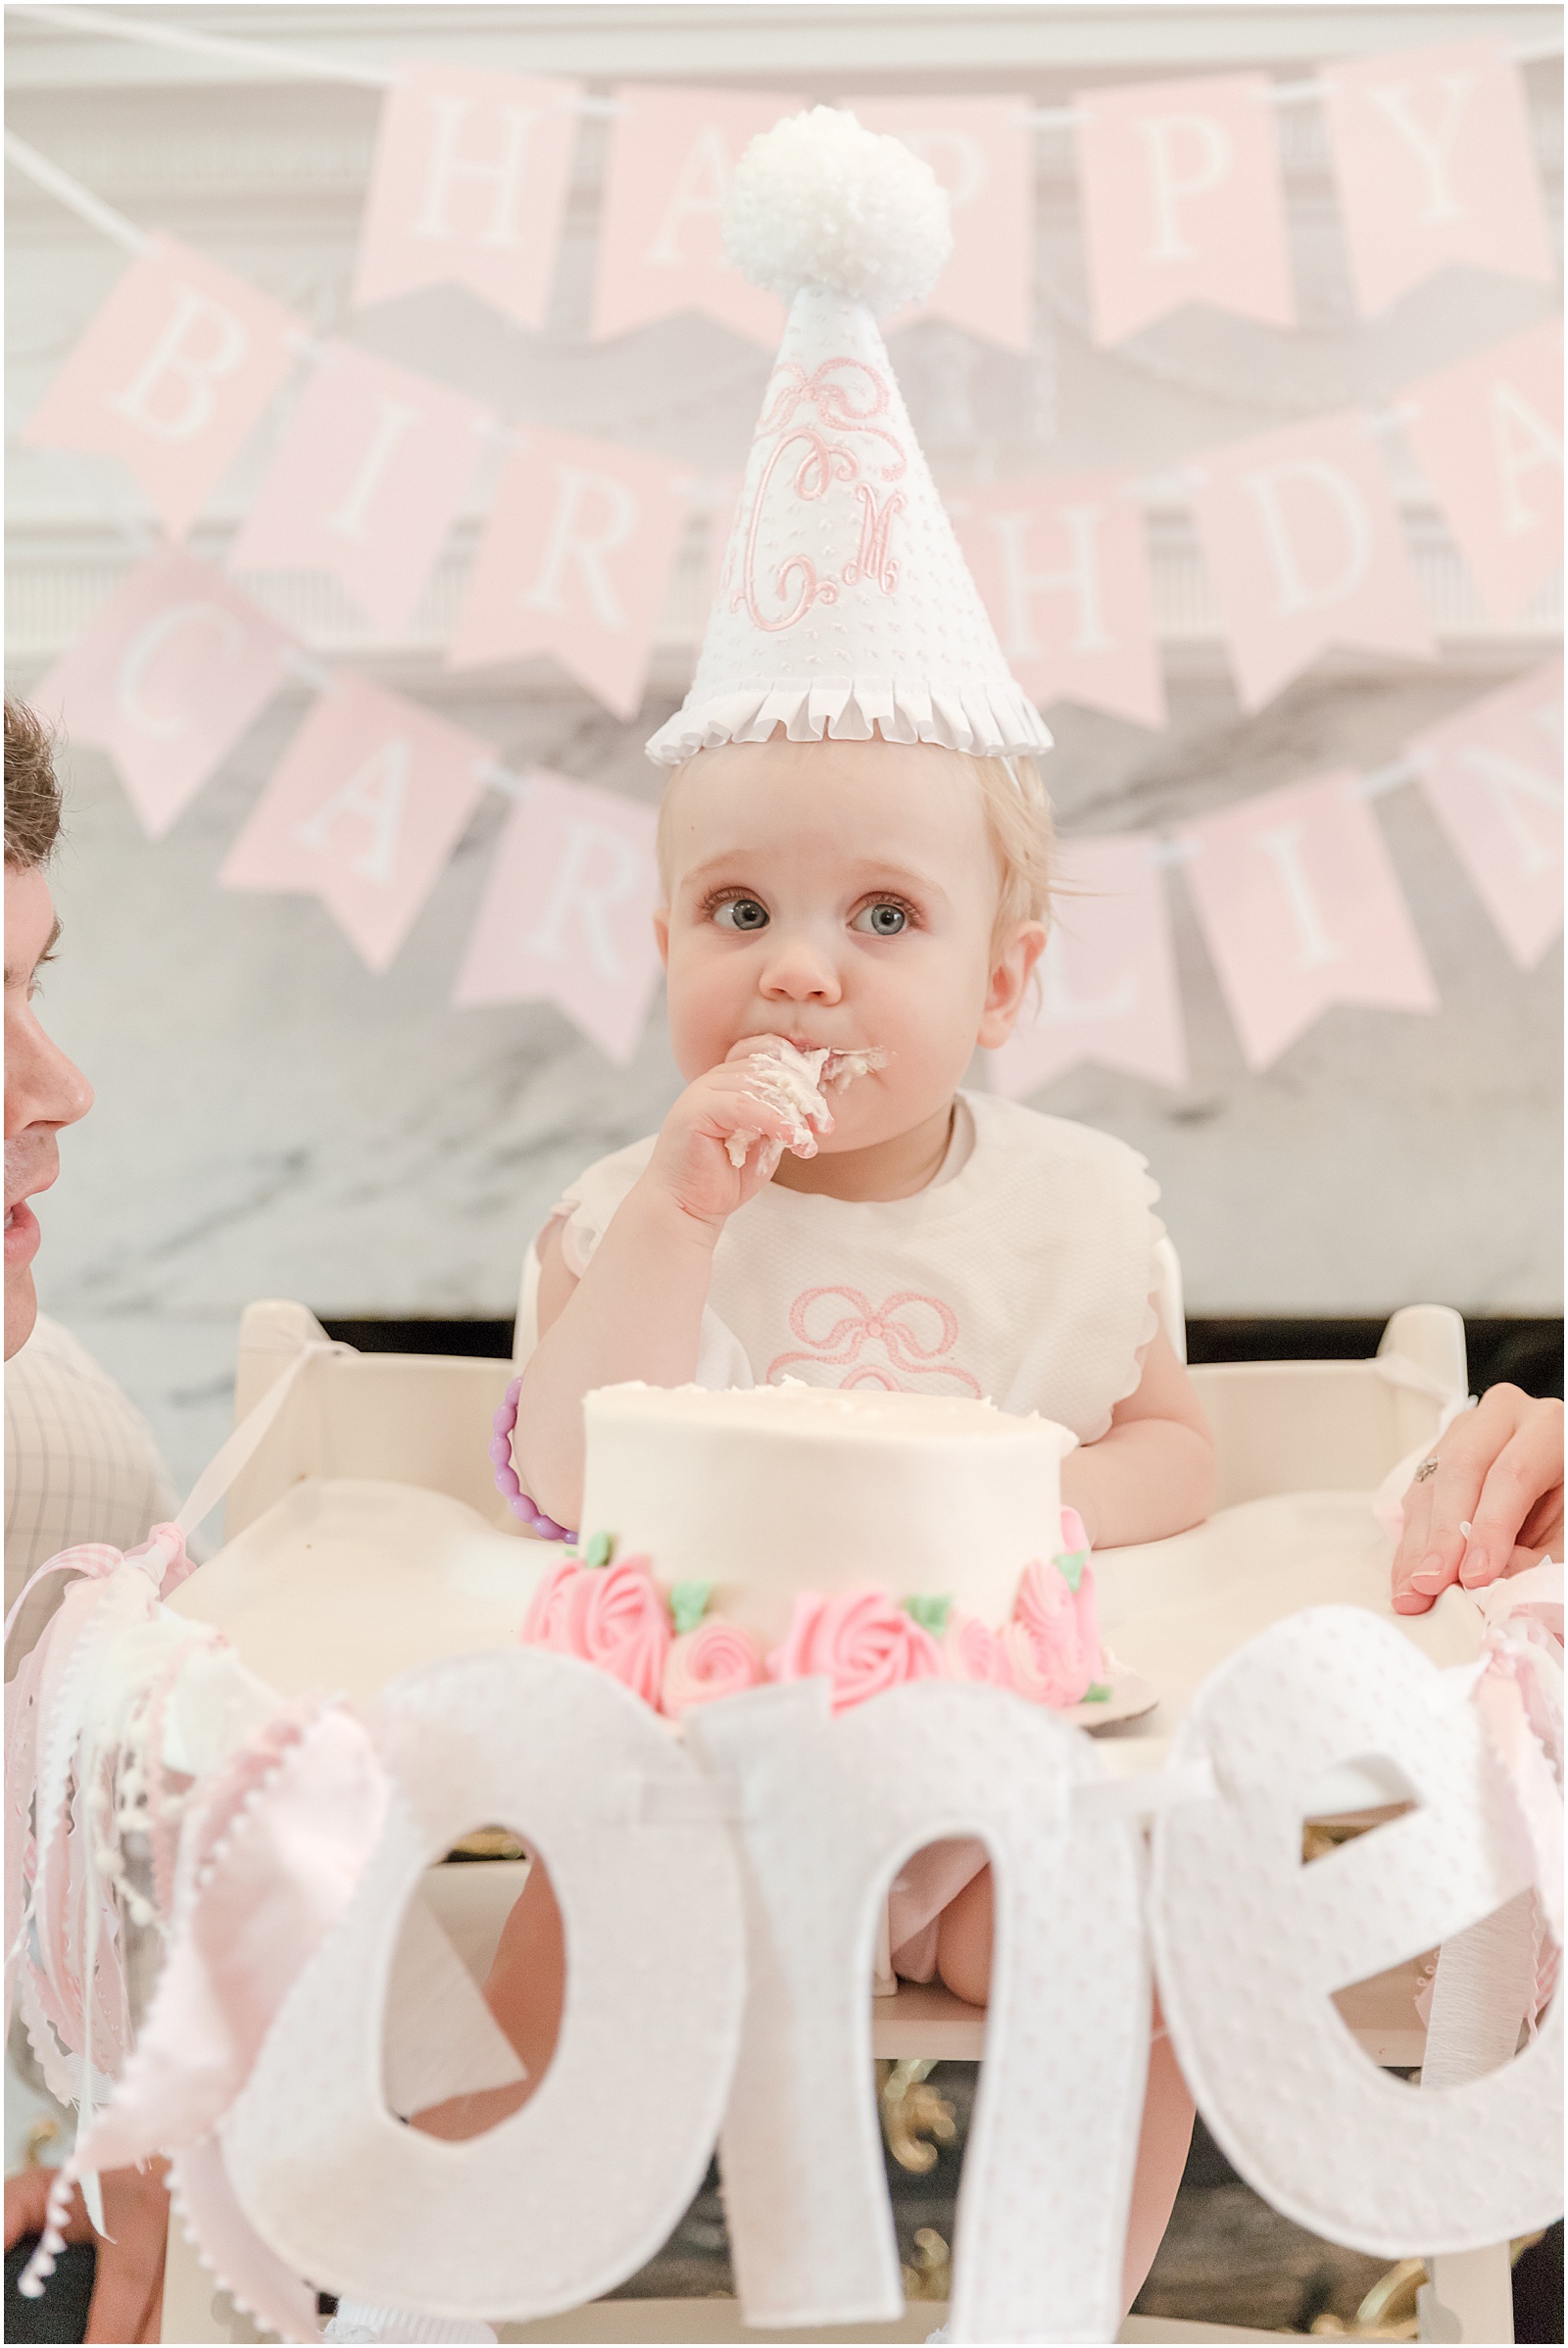 Greenville family photographer Little Happies birthday banner, pink and white birthday party